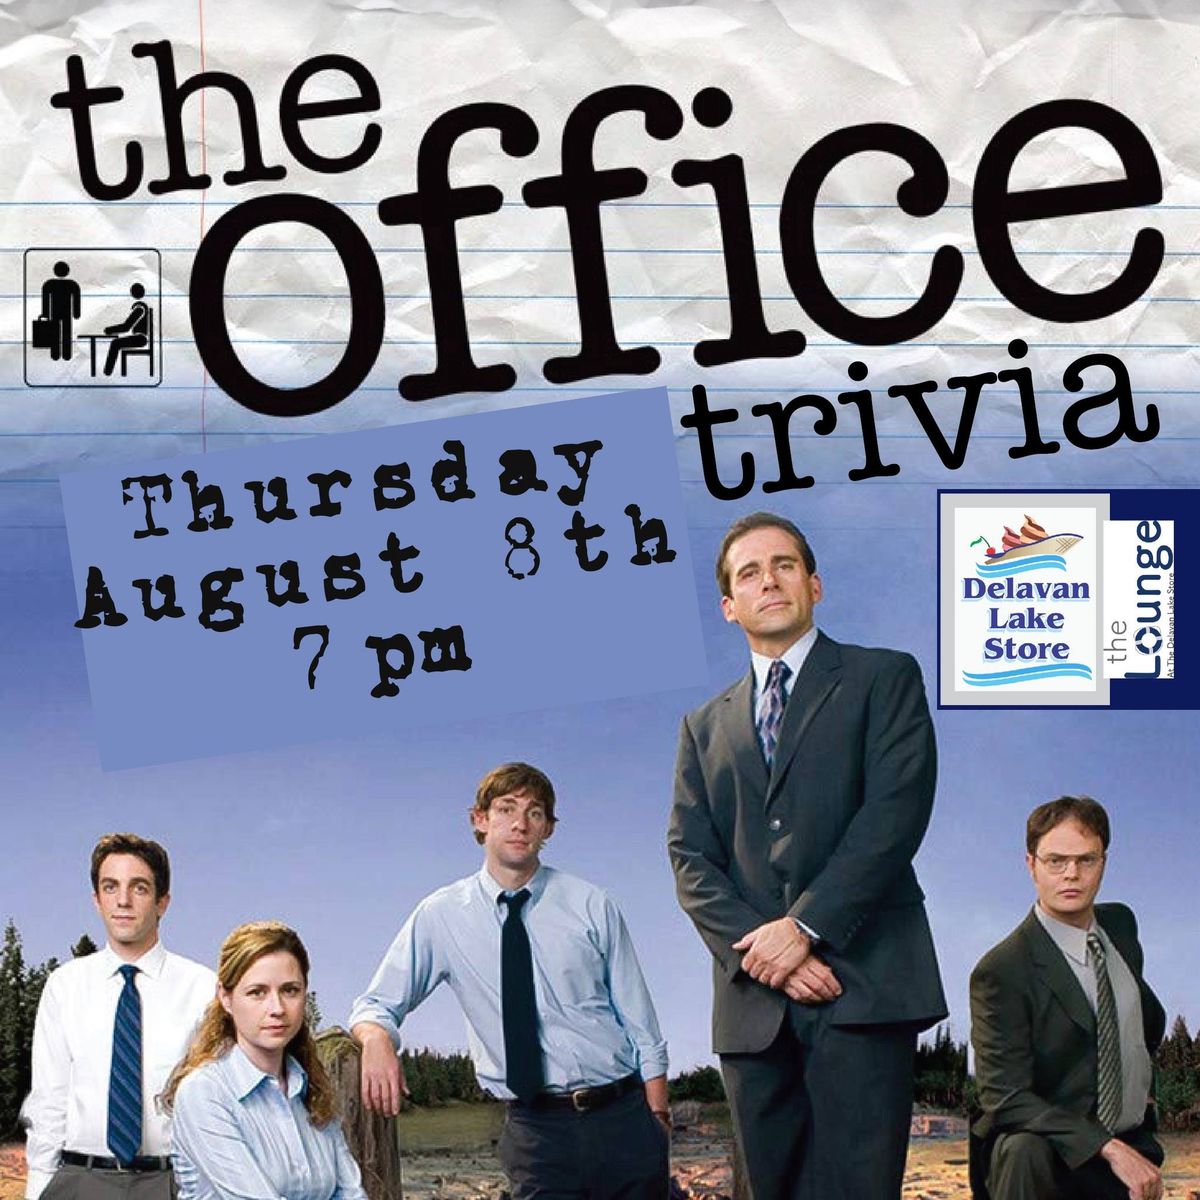 The Office Trivia